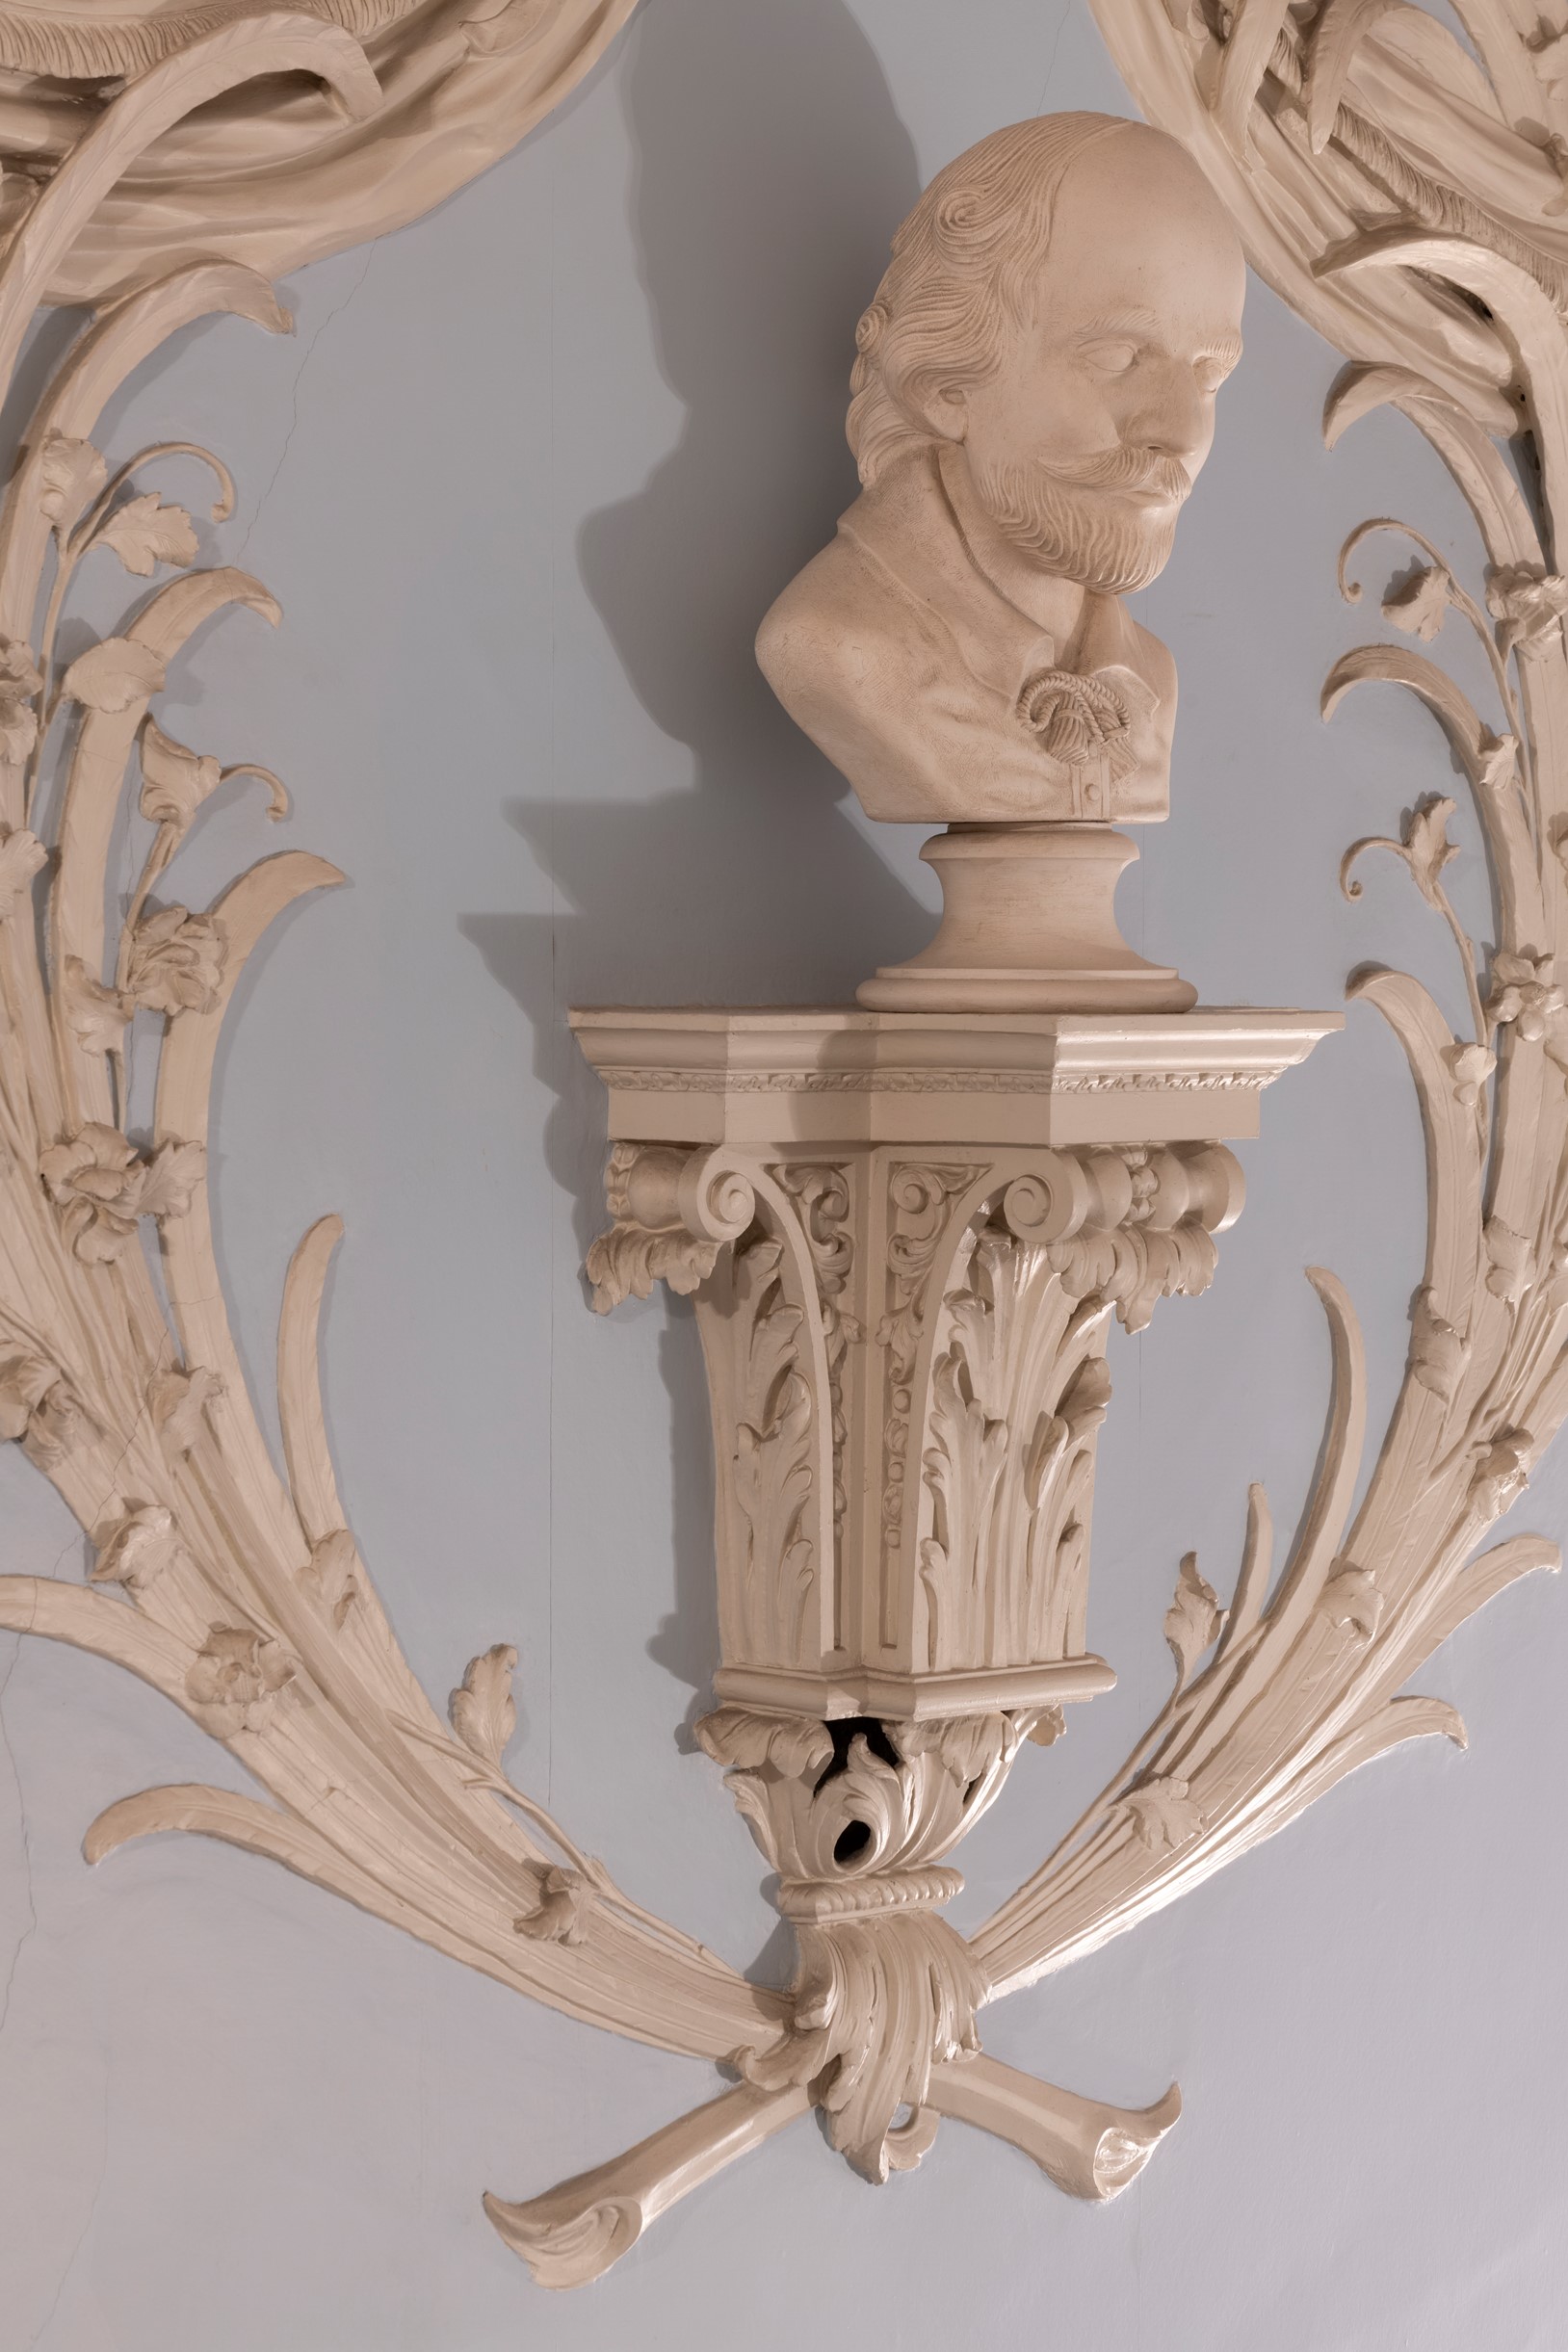 Fairfax House bust of Shakespeare | York Conservation Trust | People and place